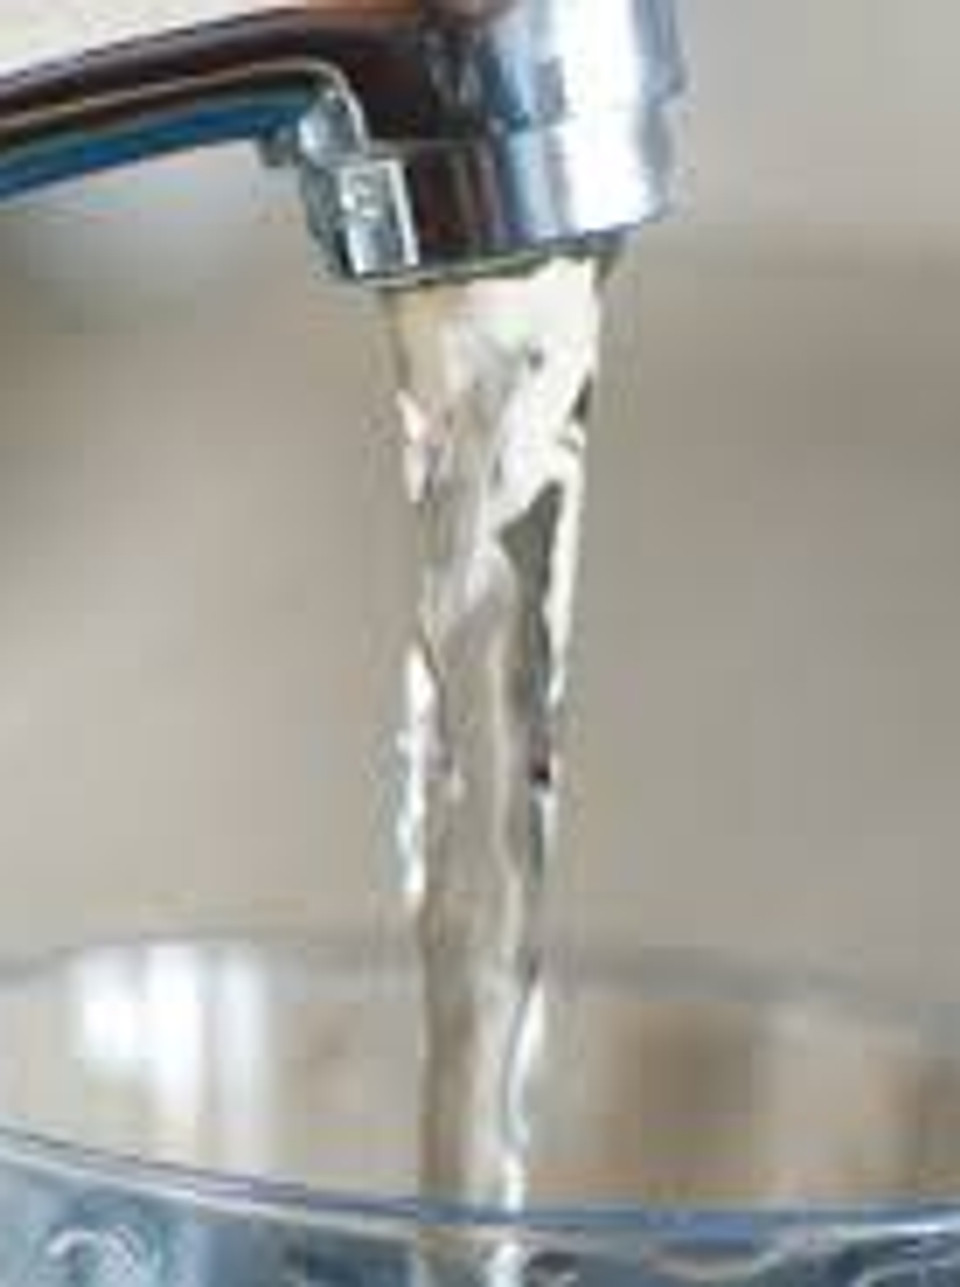 what's wrong with tap water